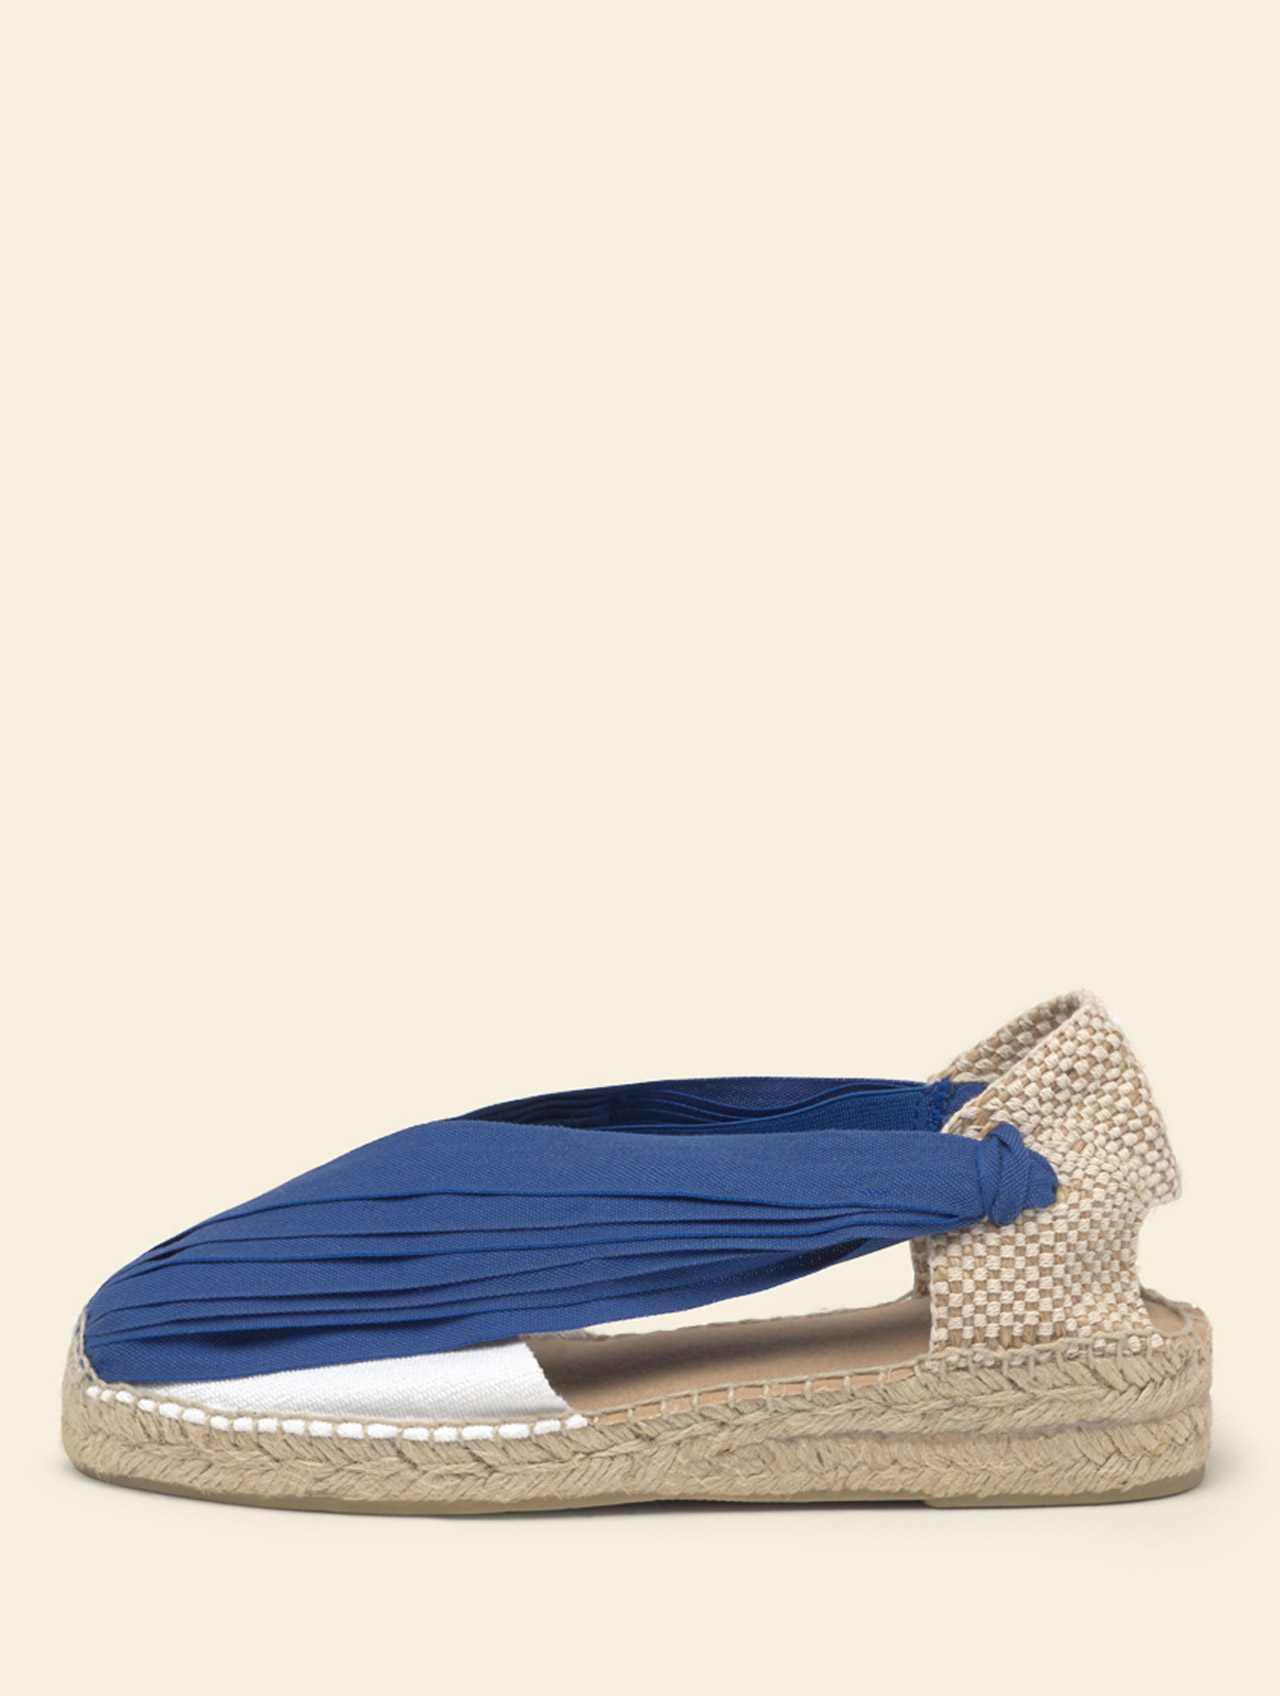 Blue Traditional Valls espadrille with elastics in the sides, 3.5 cm wedge approximately. Handmade espadrille by La Manual Alpargatera, Barcelona.